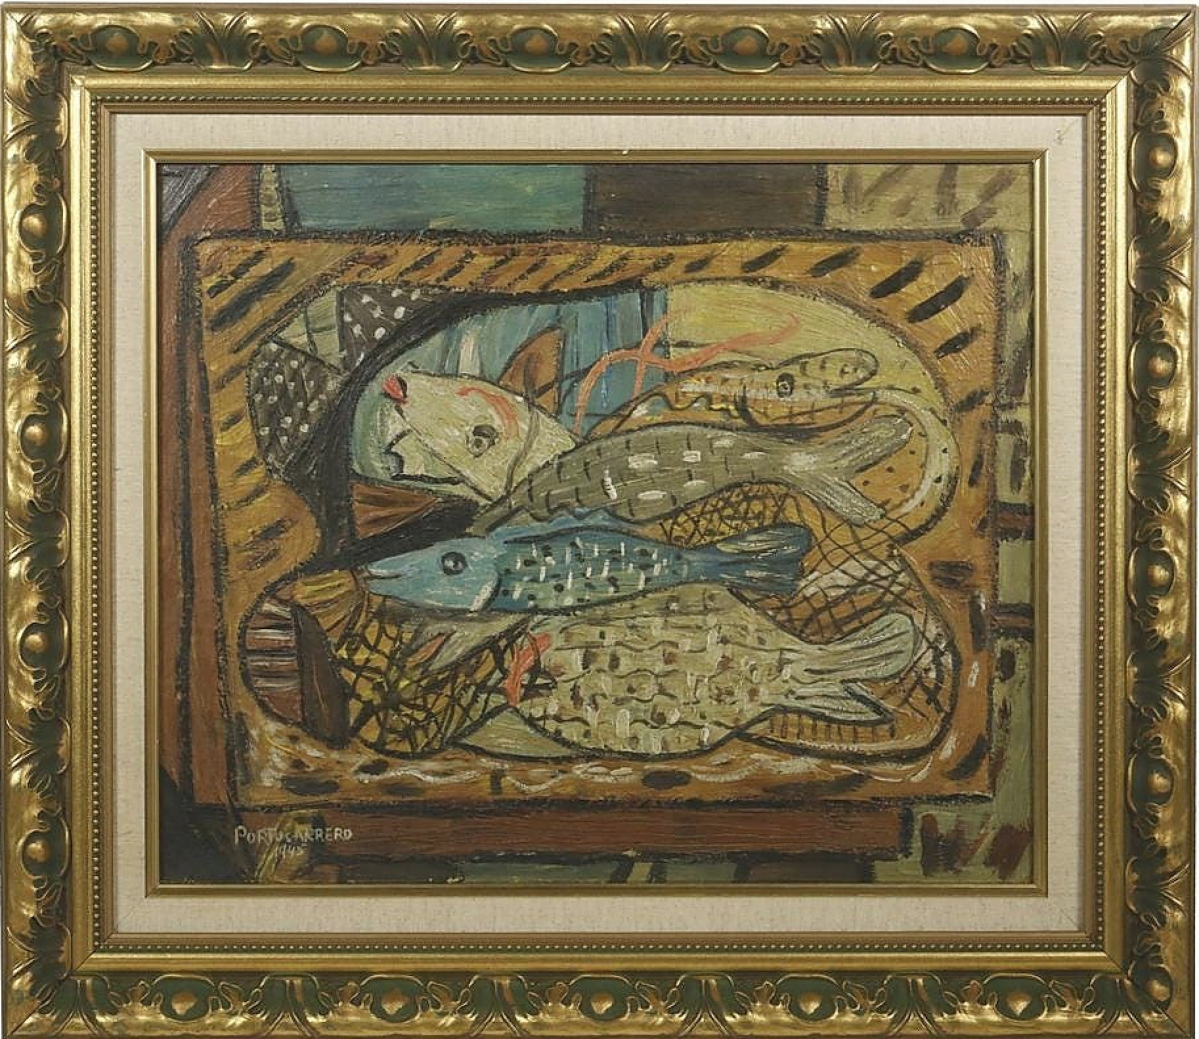 René Portocarrero (Cuban, 1912-1985) painted “Peces” in 1945. The 14½-by-17½-inch work sold for $19,200.